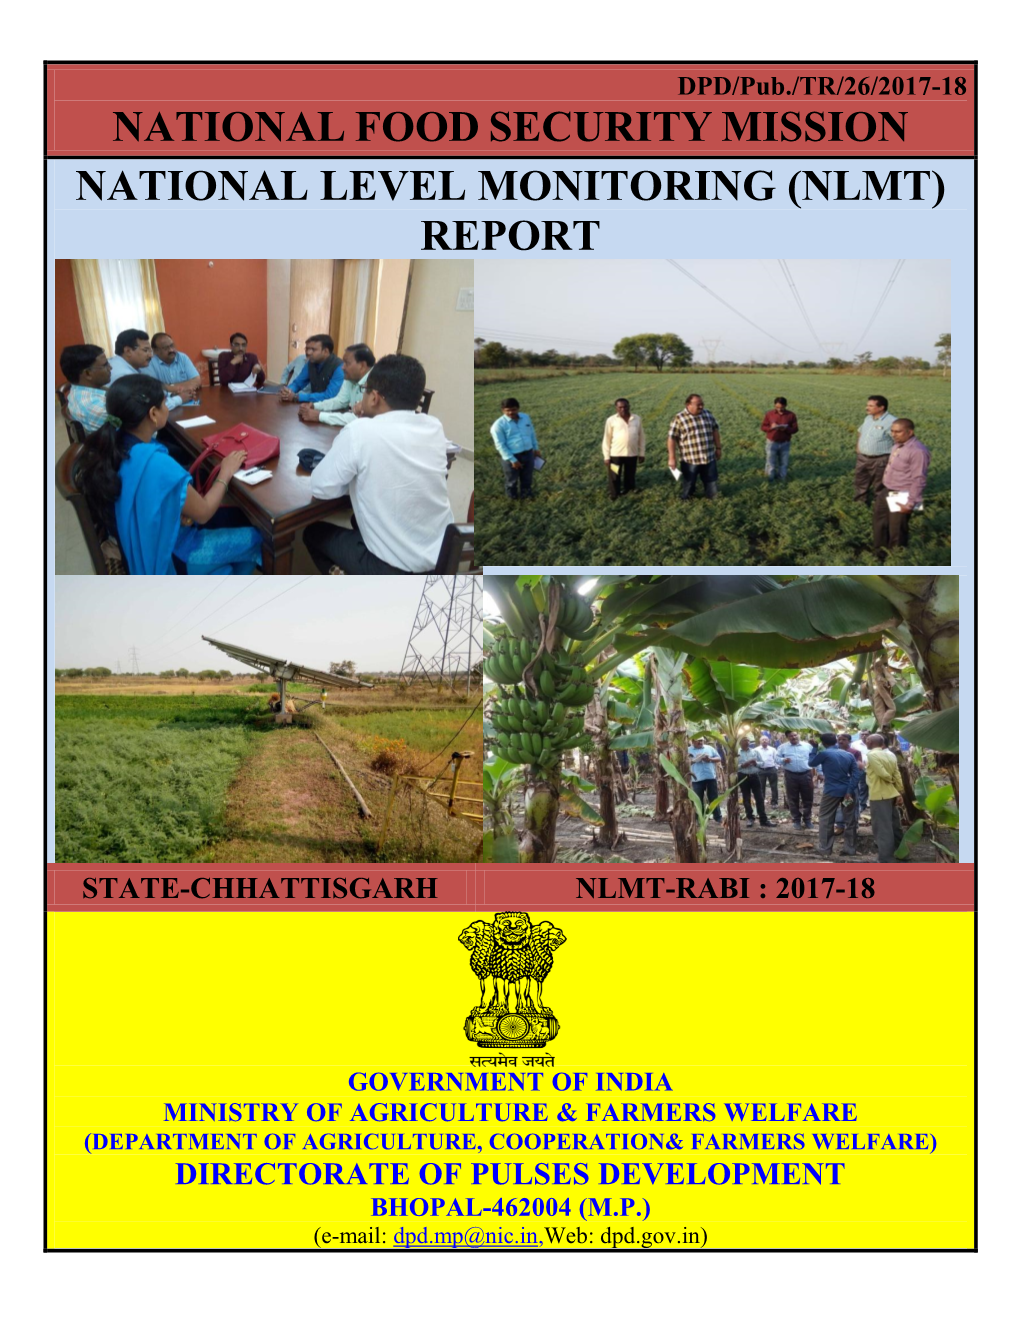 National Food Security Mission National Level Monitoring (Nlmt) Report